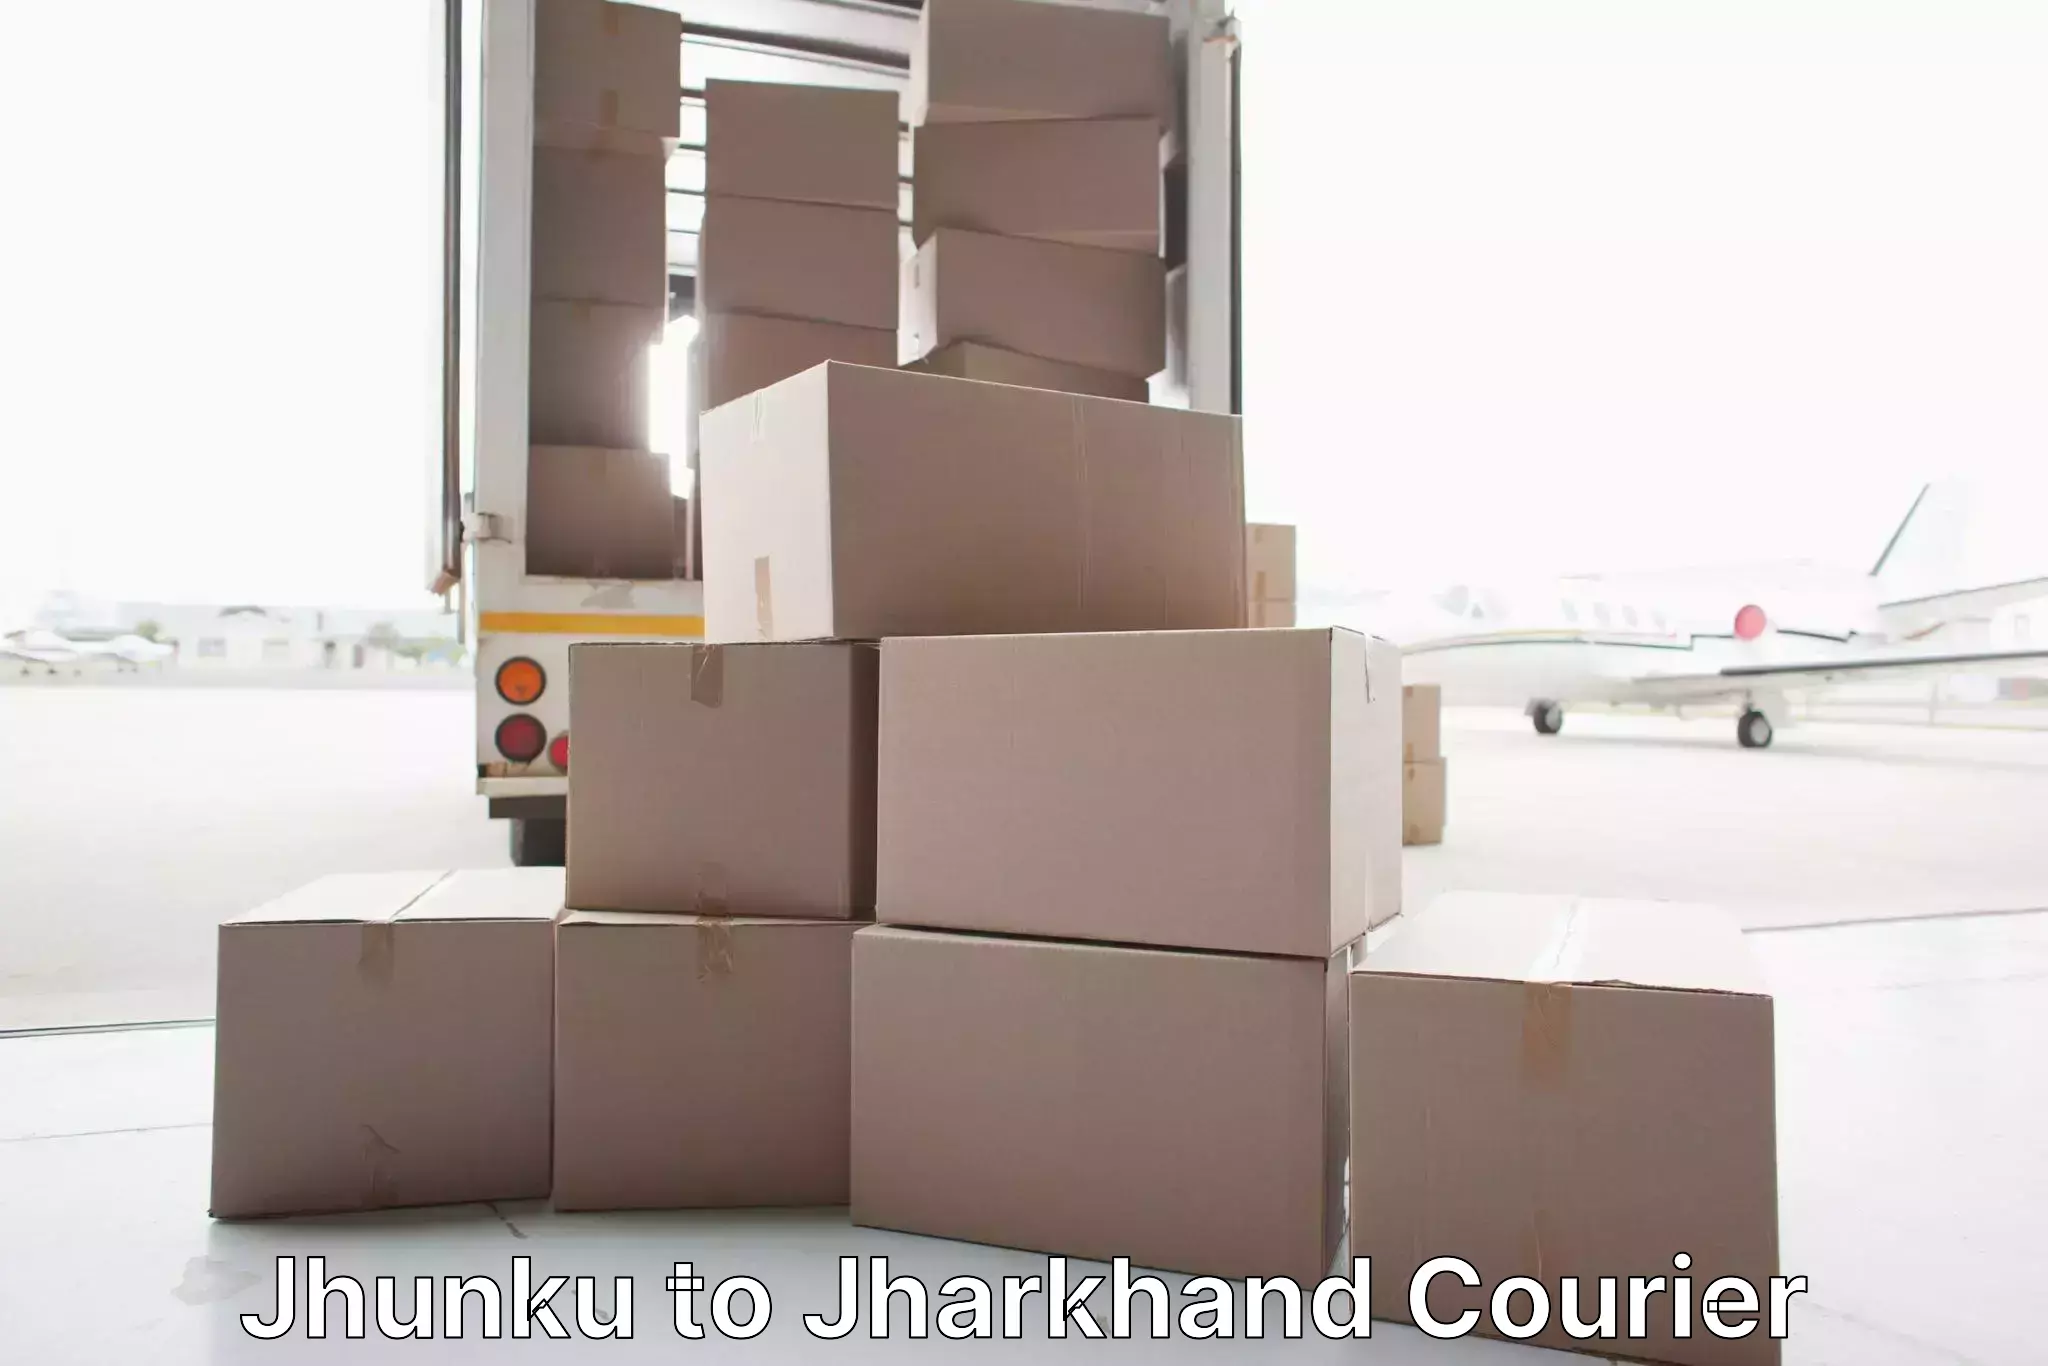 Hassle-free relocation Jhunku to Ranchi